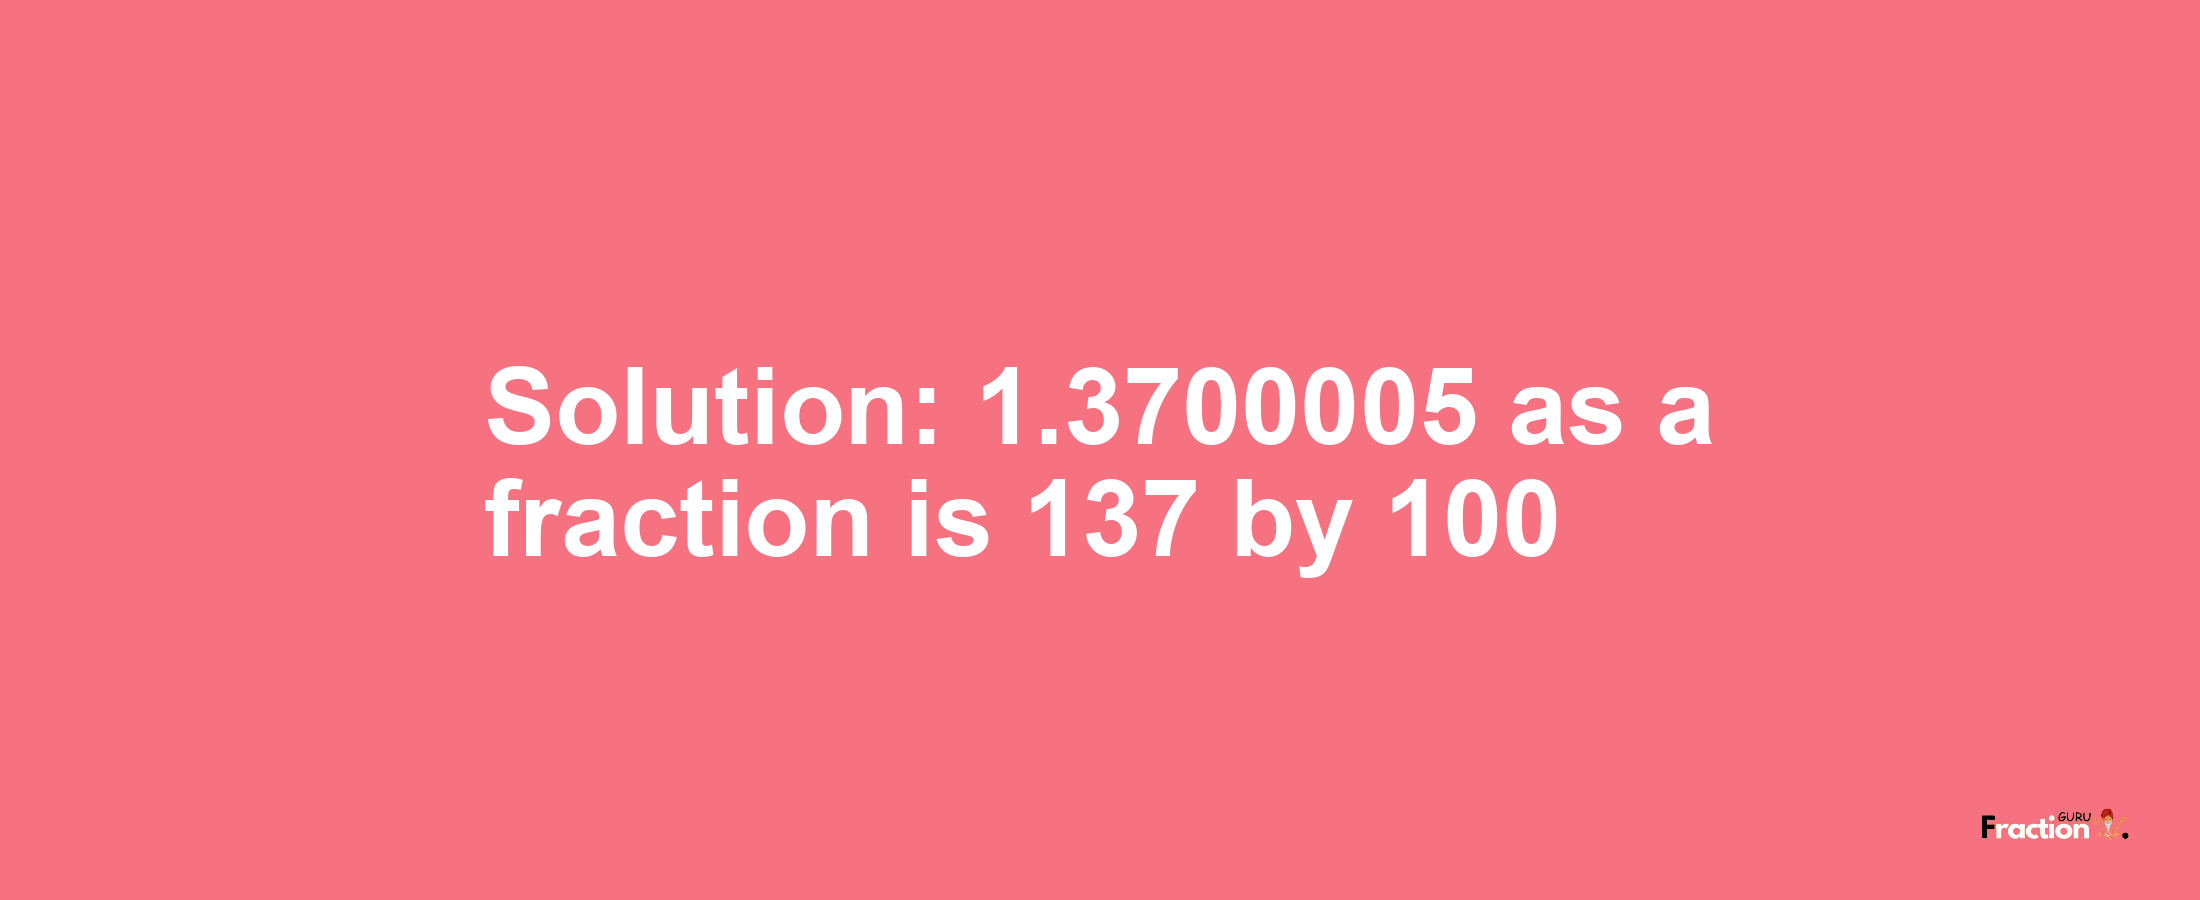 Solution:1.3700005 as a fraction is 137/100